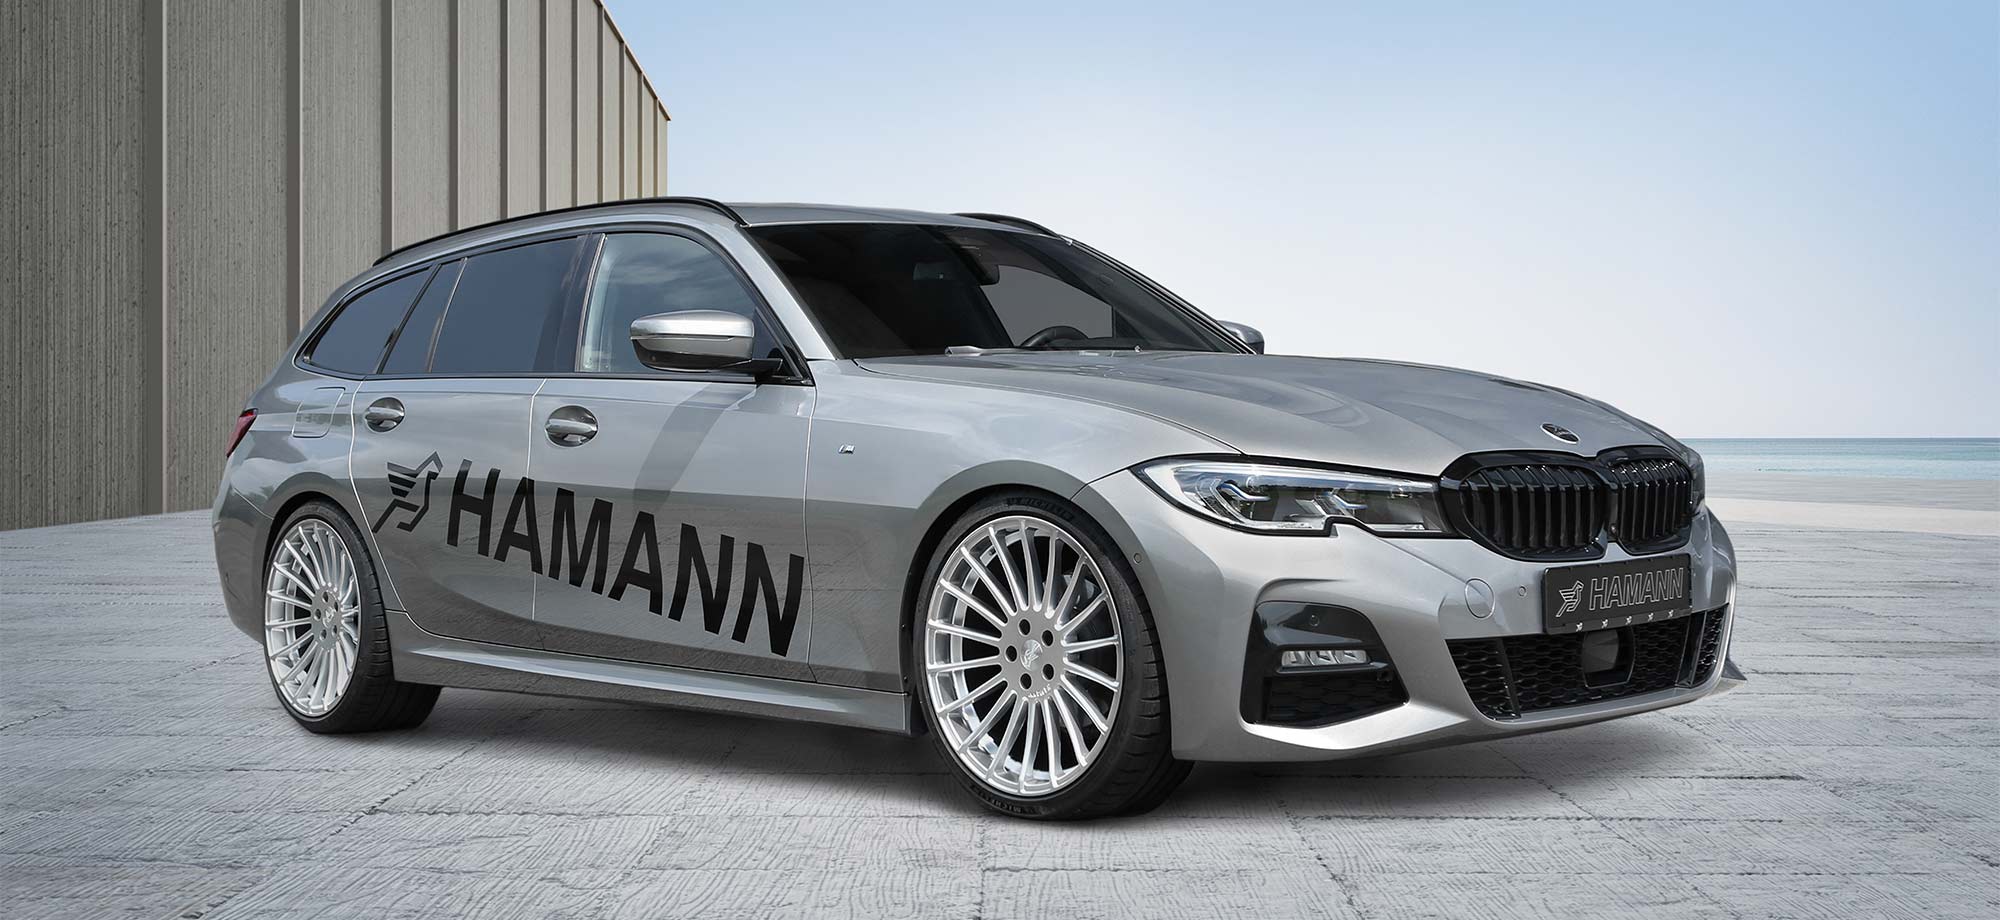 Complete Wheel and Tire Set for THE 3 - BMW 3 series Touring G21